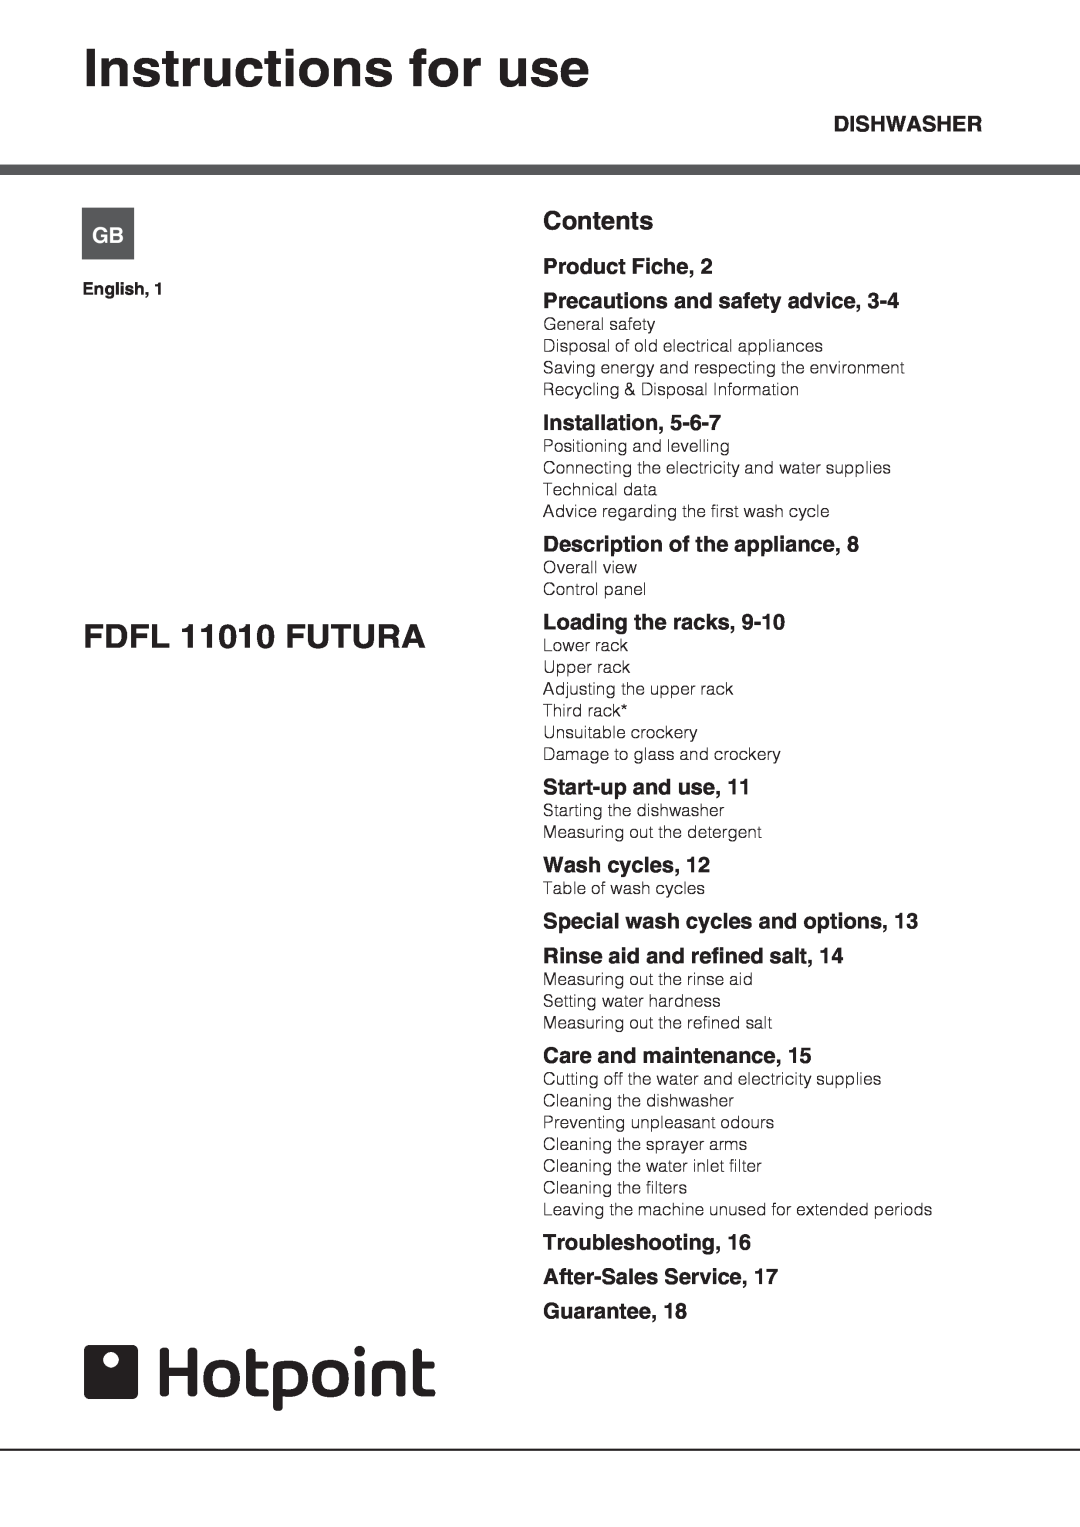 Hotpoint manual Instructions for use, FDFL 11010 FUTURA, Contents 